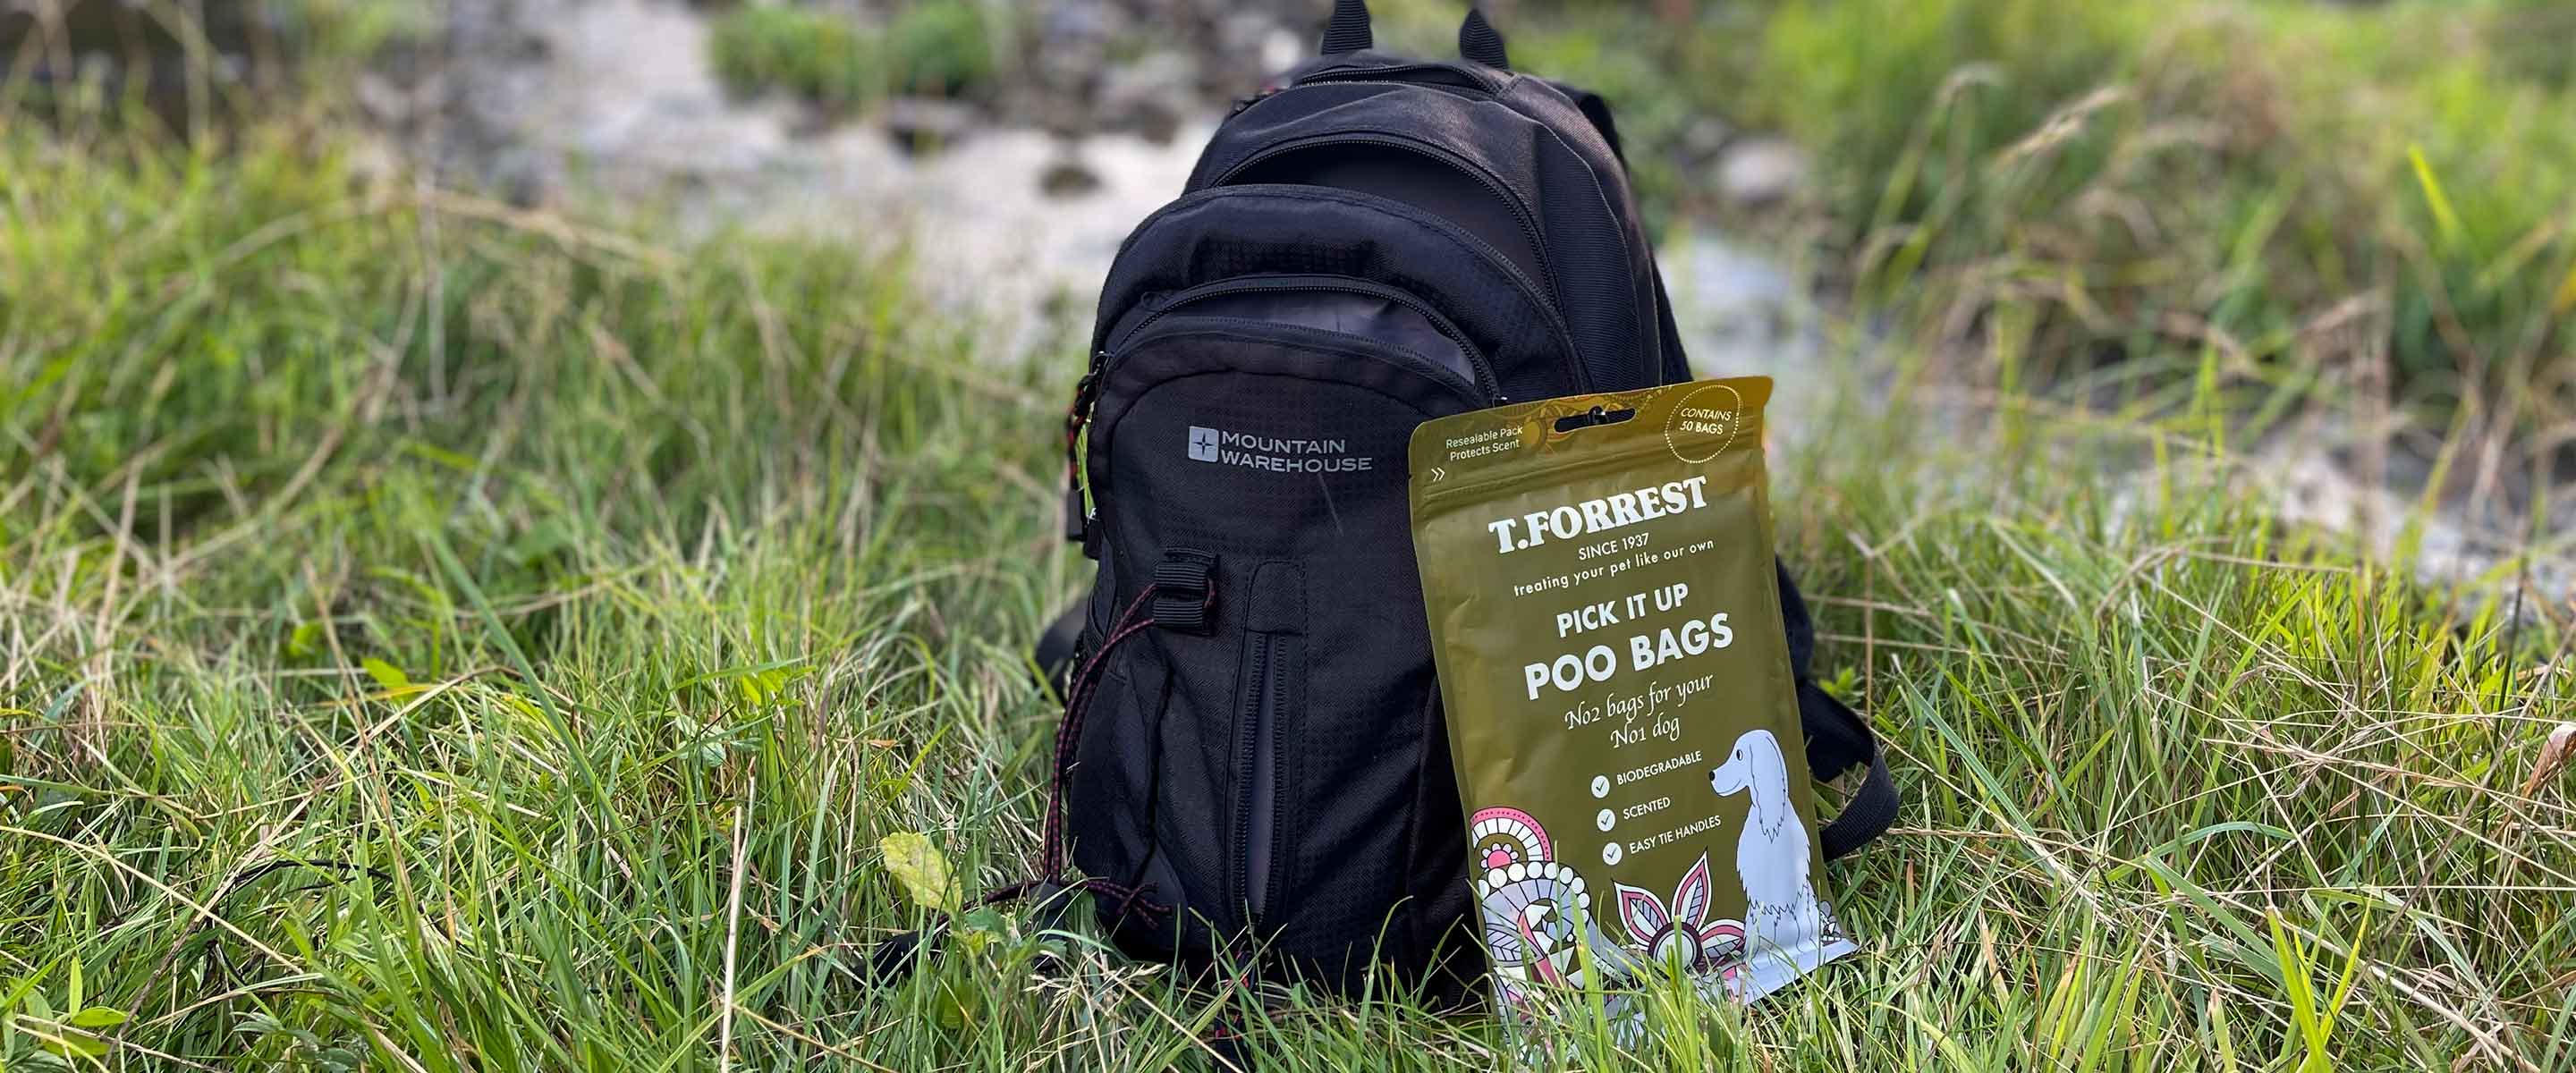 poo bags for dogs